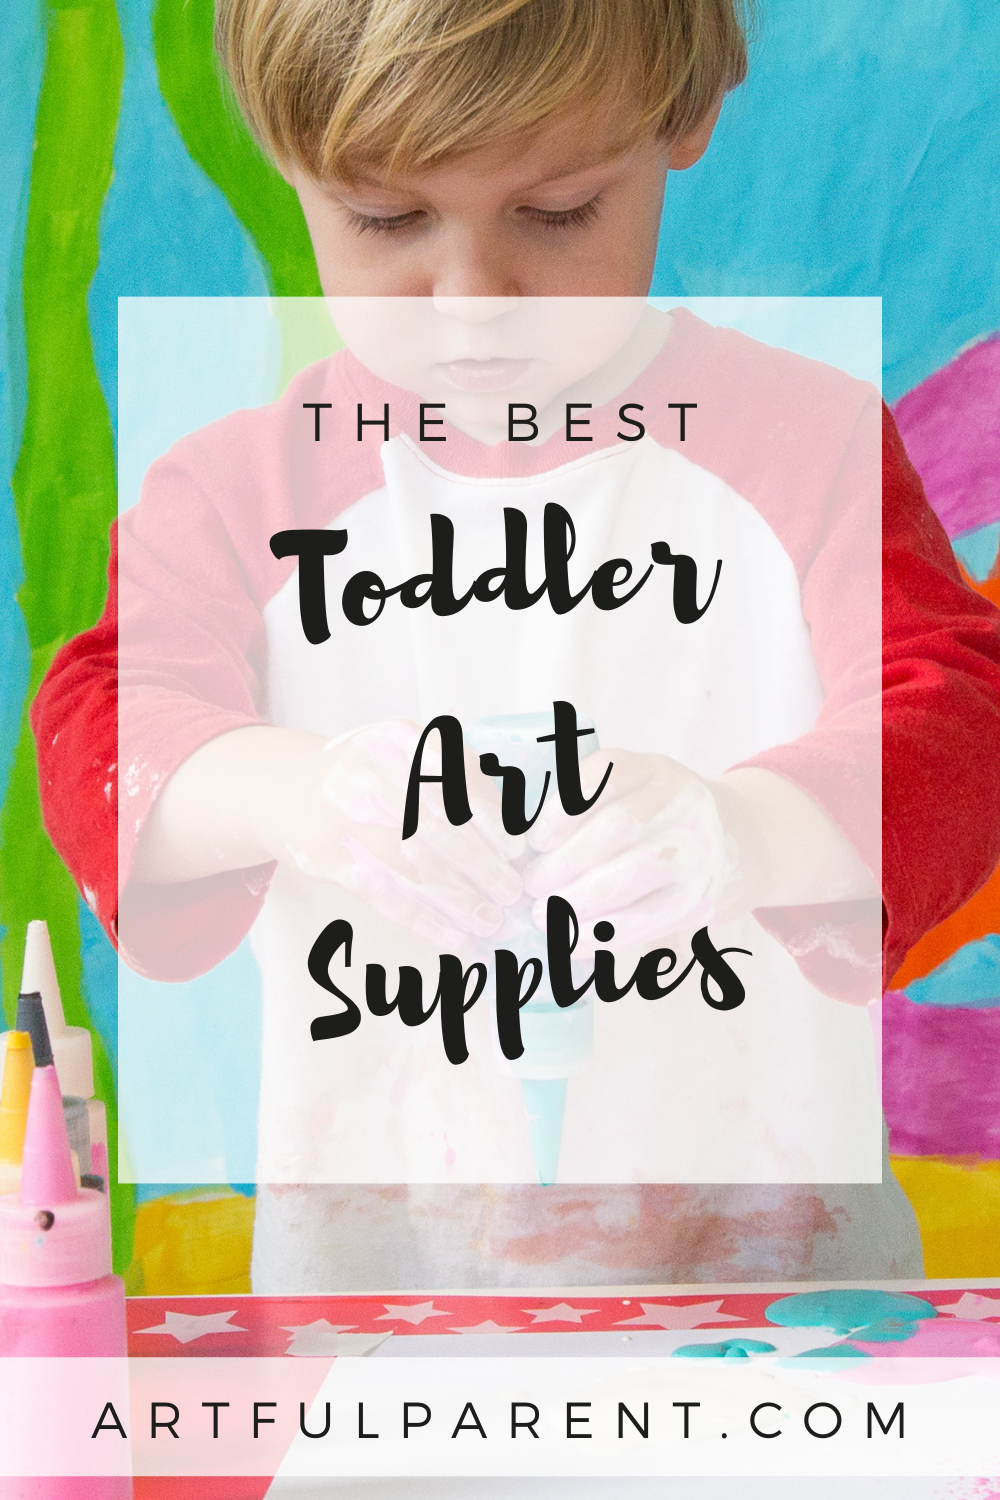 The Best Art Supplies for Kids in 2023